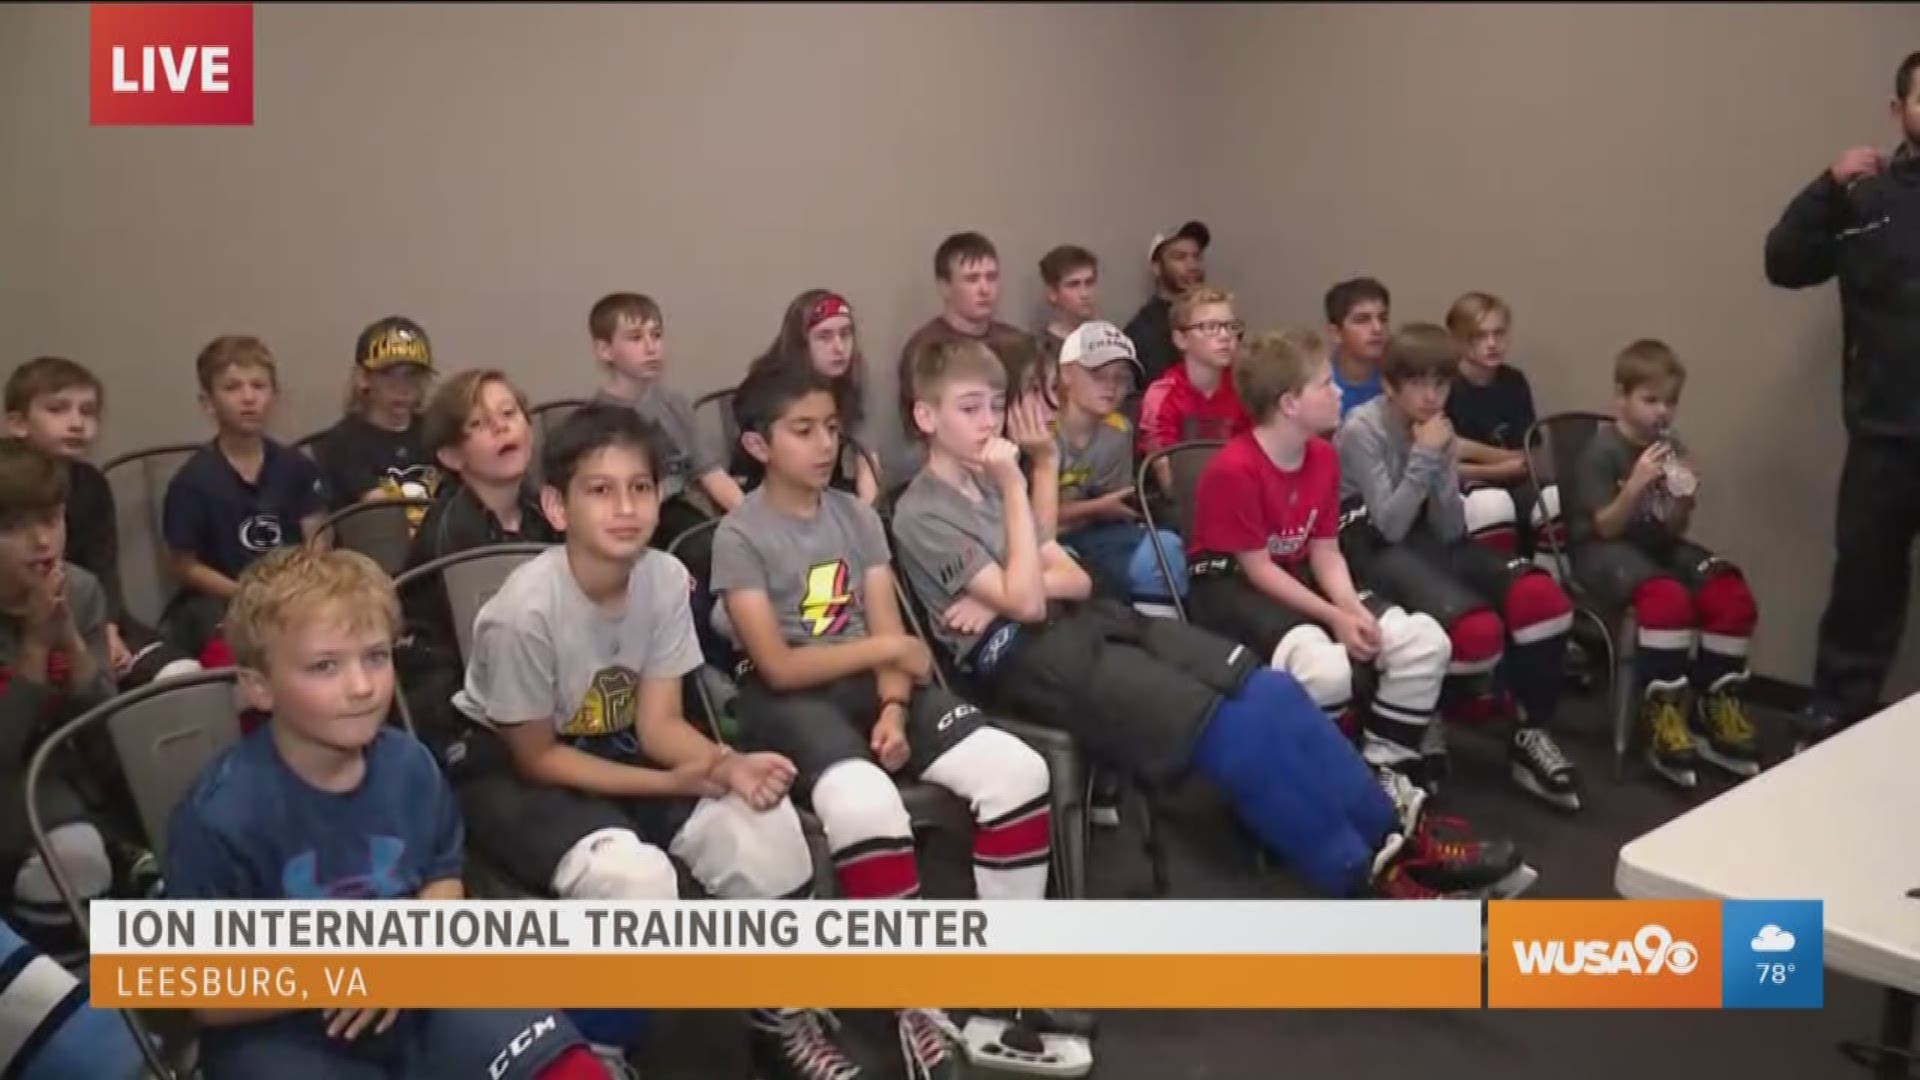 Athletes of all ages get a well rounded sports education at the ION International Training Center in Leesburg.